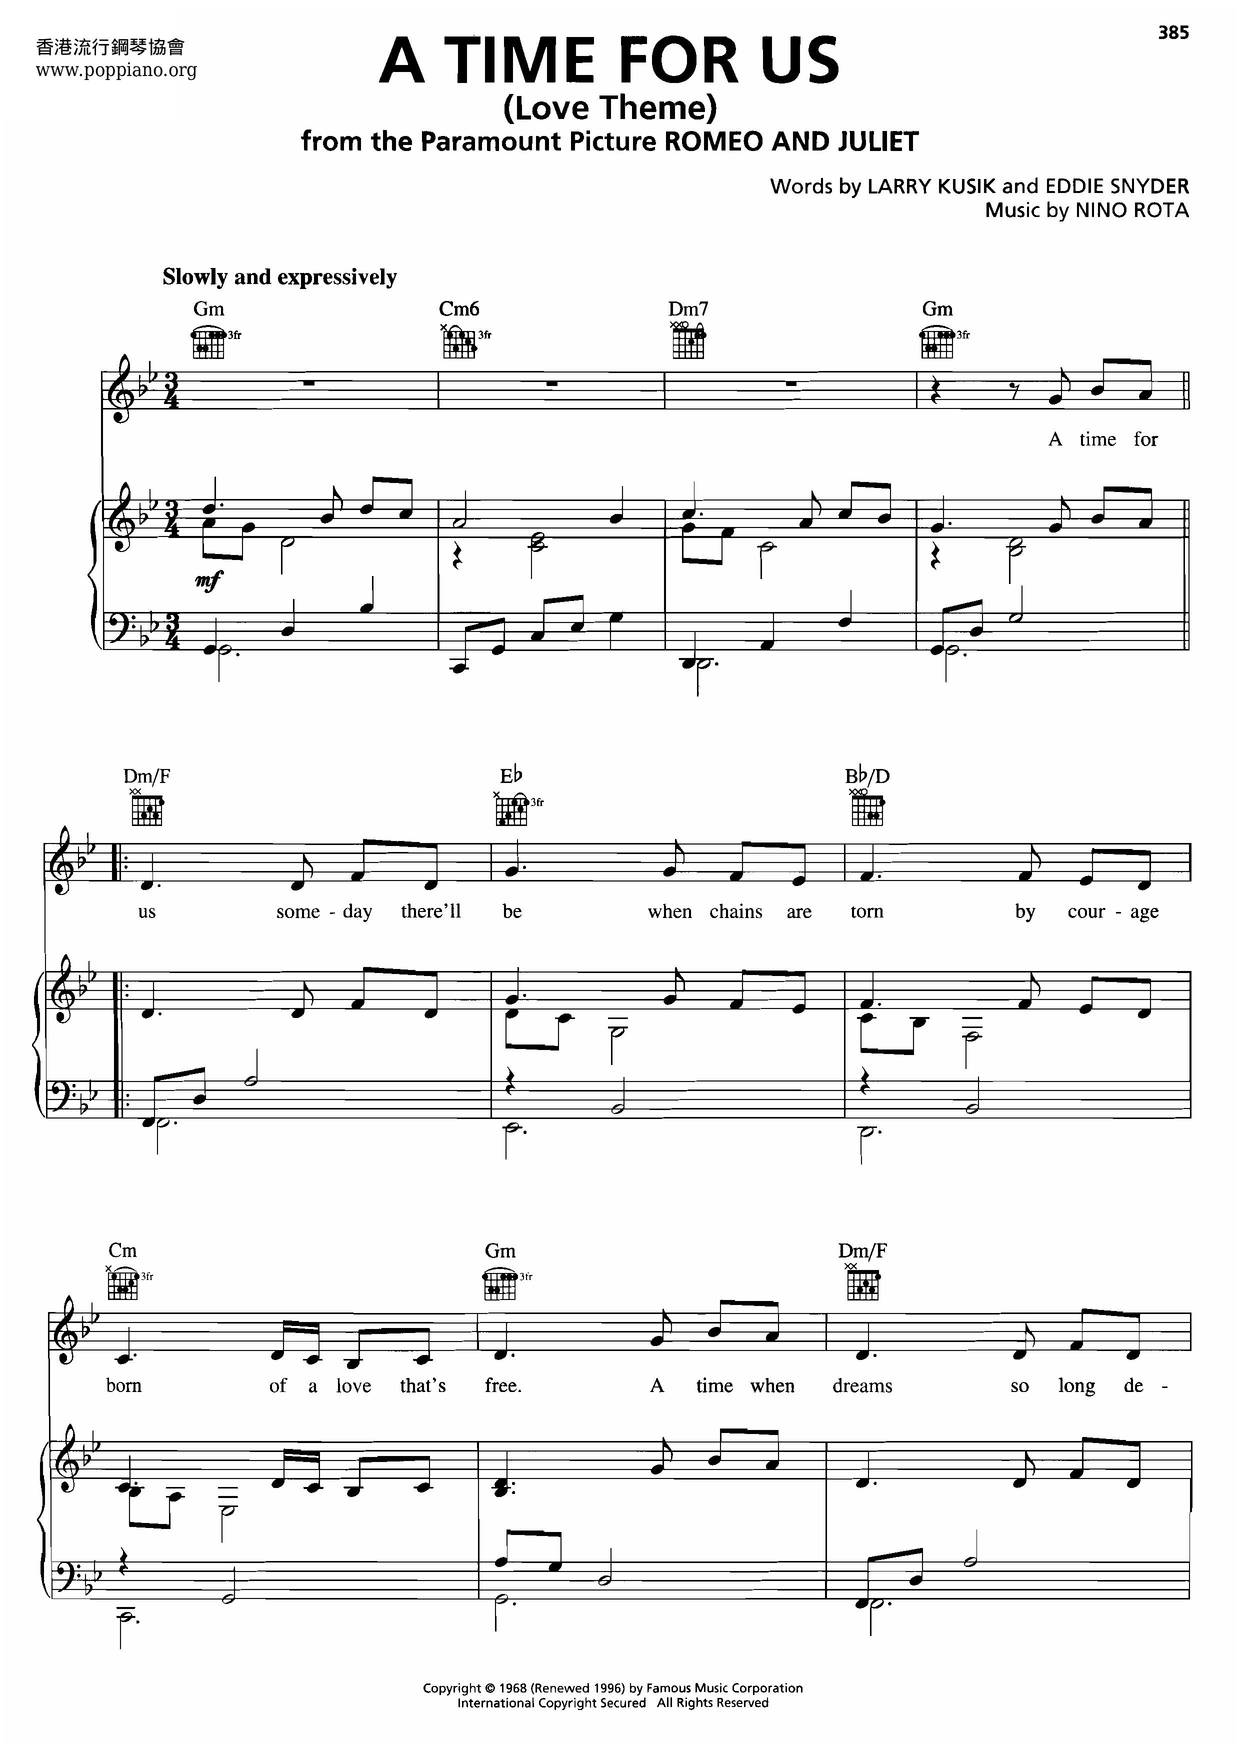 Romeo And Juliet - A Time For Us Score